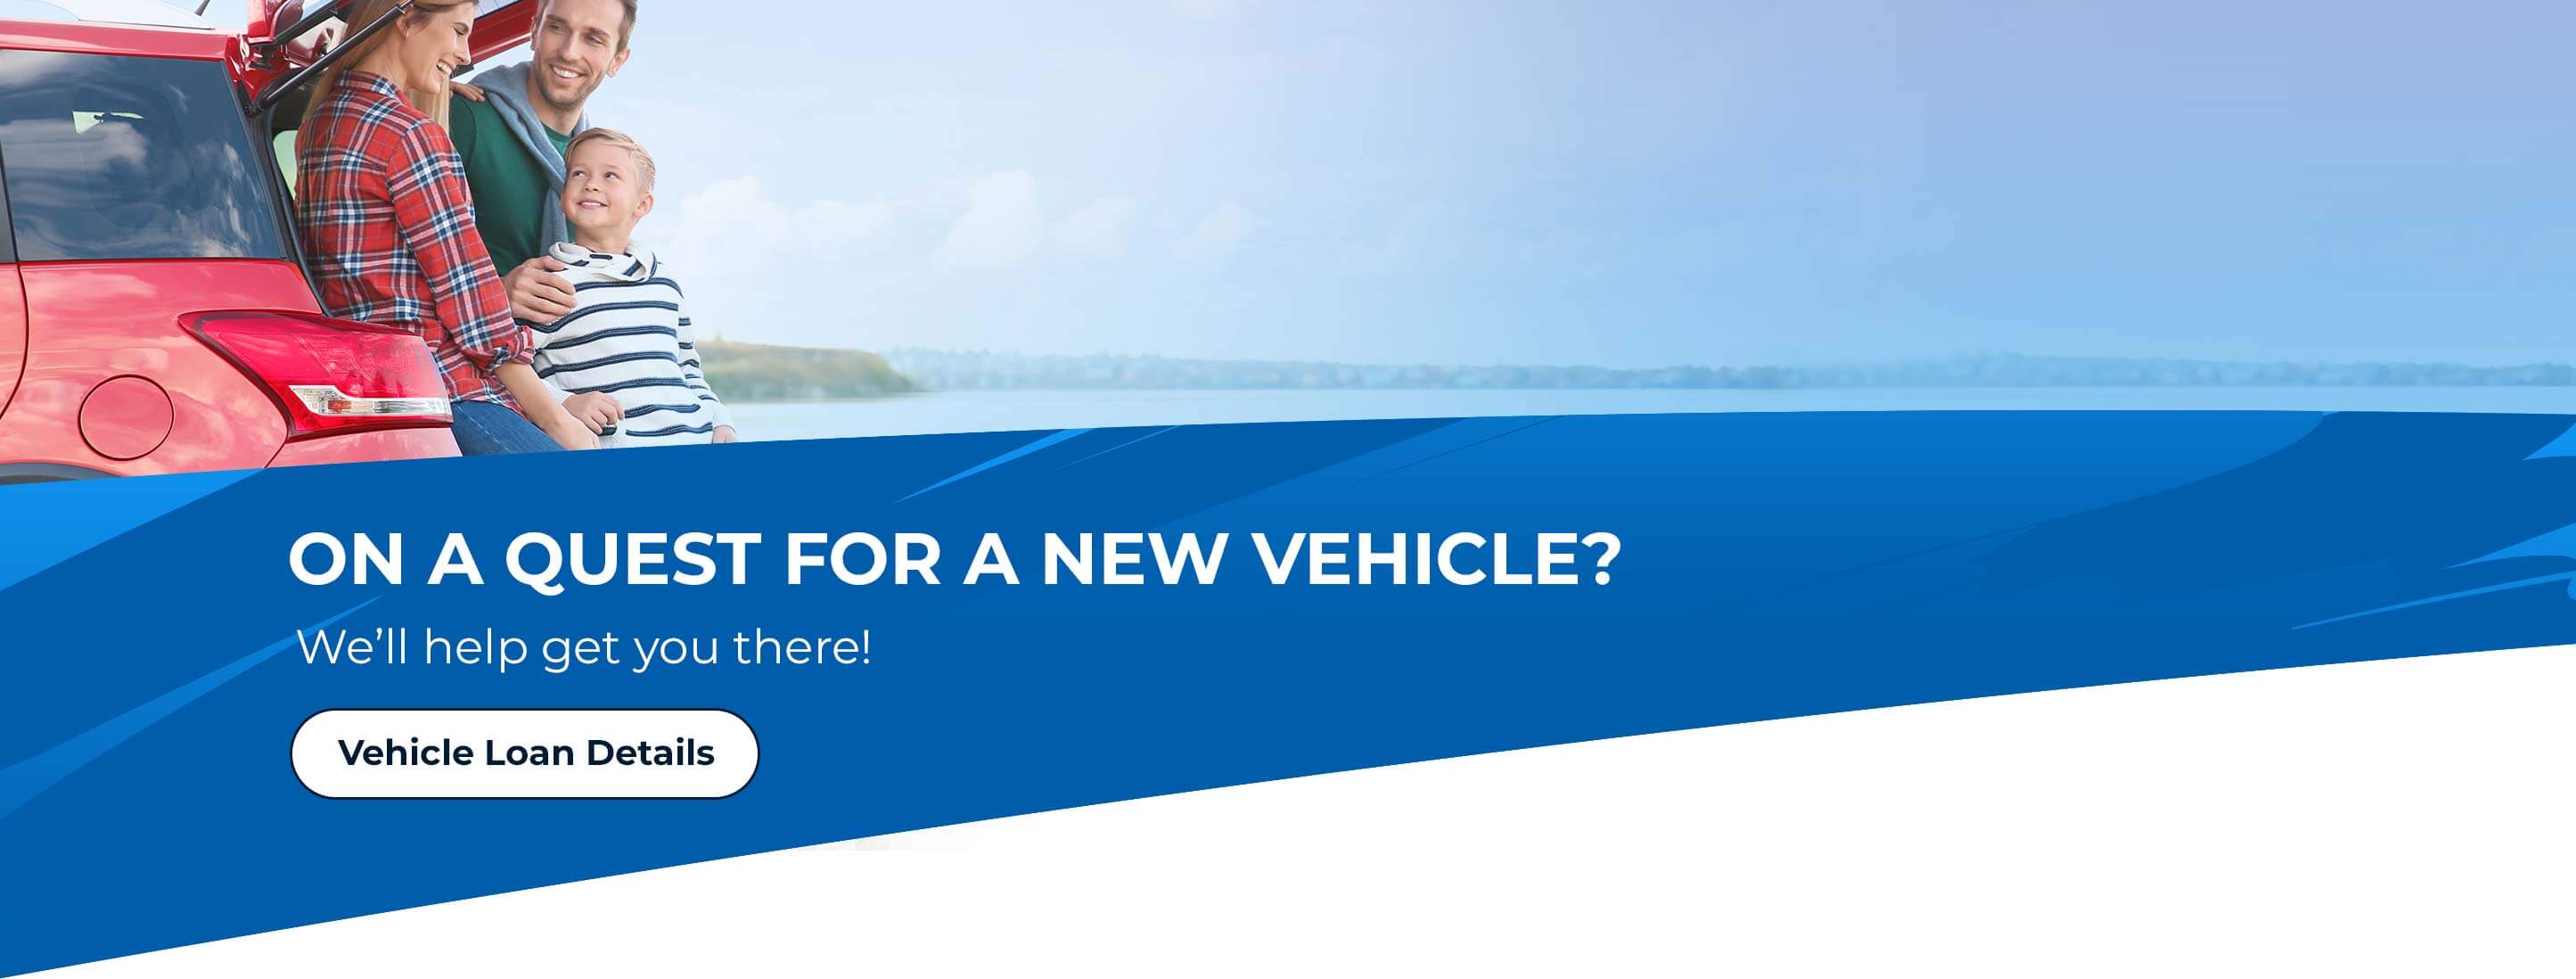 On a quest for a new vehicle? We'll help you get there! Vehicle Loan Details.